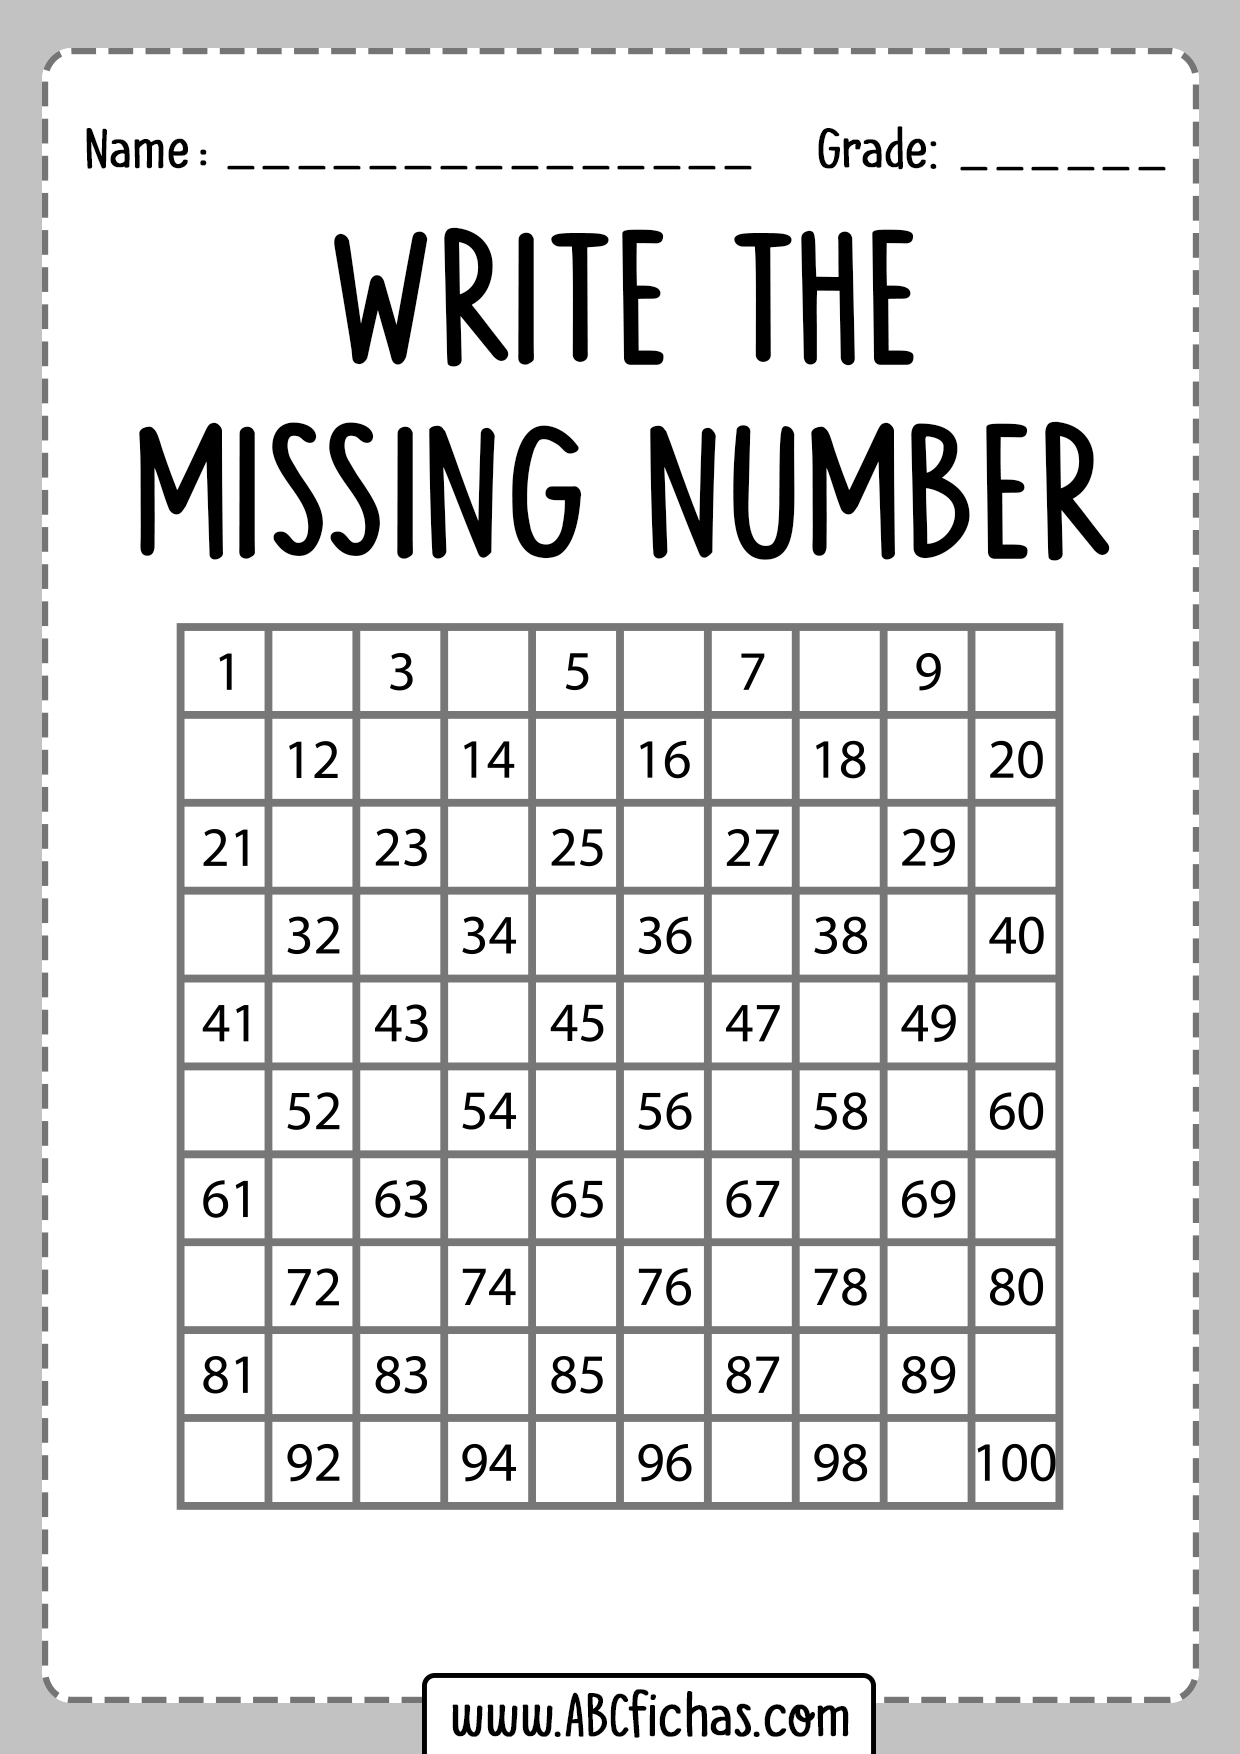 Write The Missing Number Worksheets For First Grade ABC Fichas